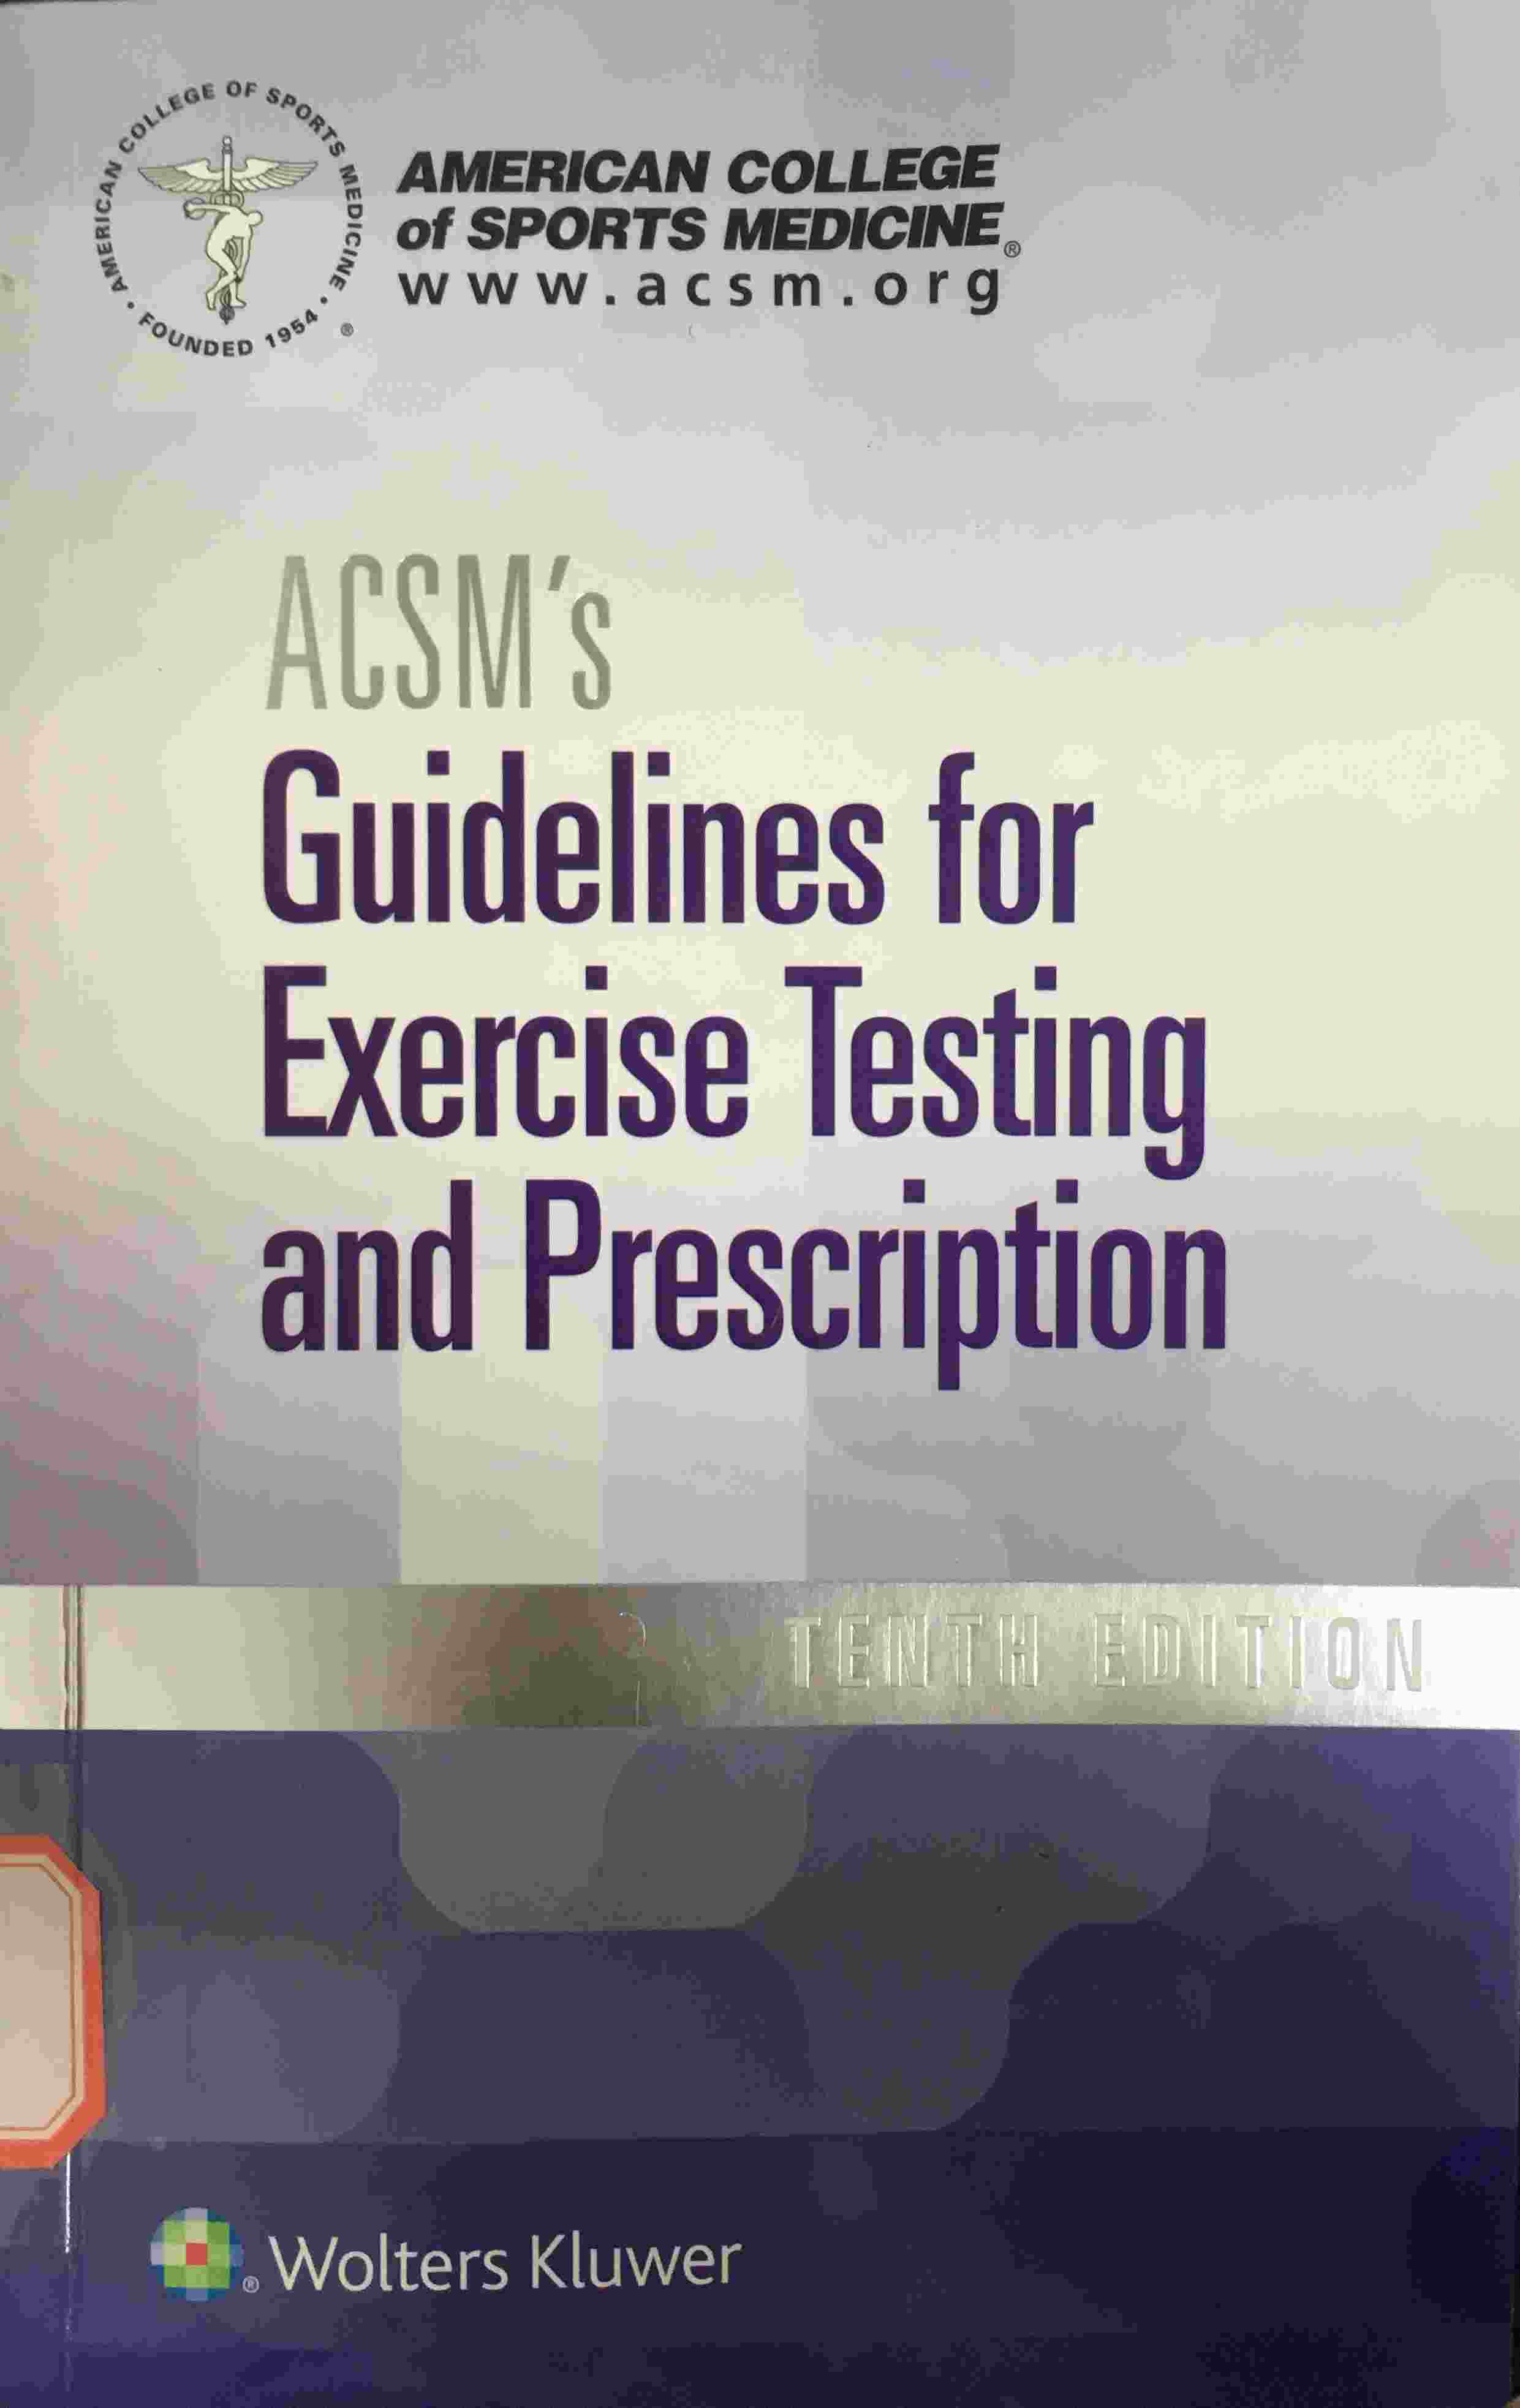 «ACSM’s Guidelines for Exercise testing and prescription»